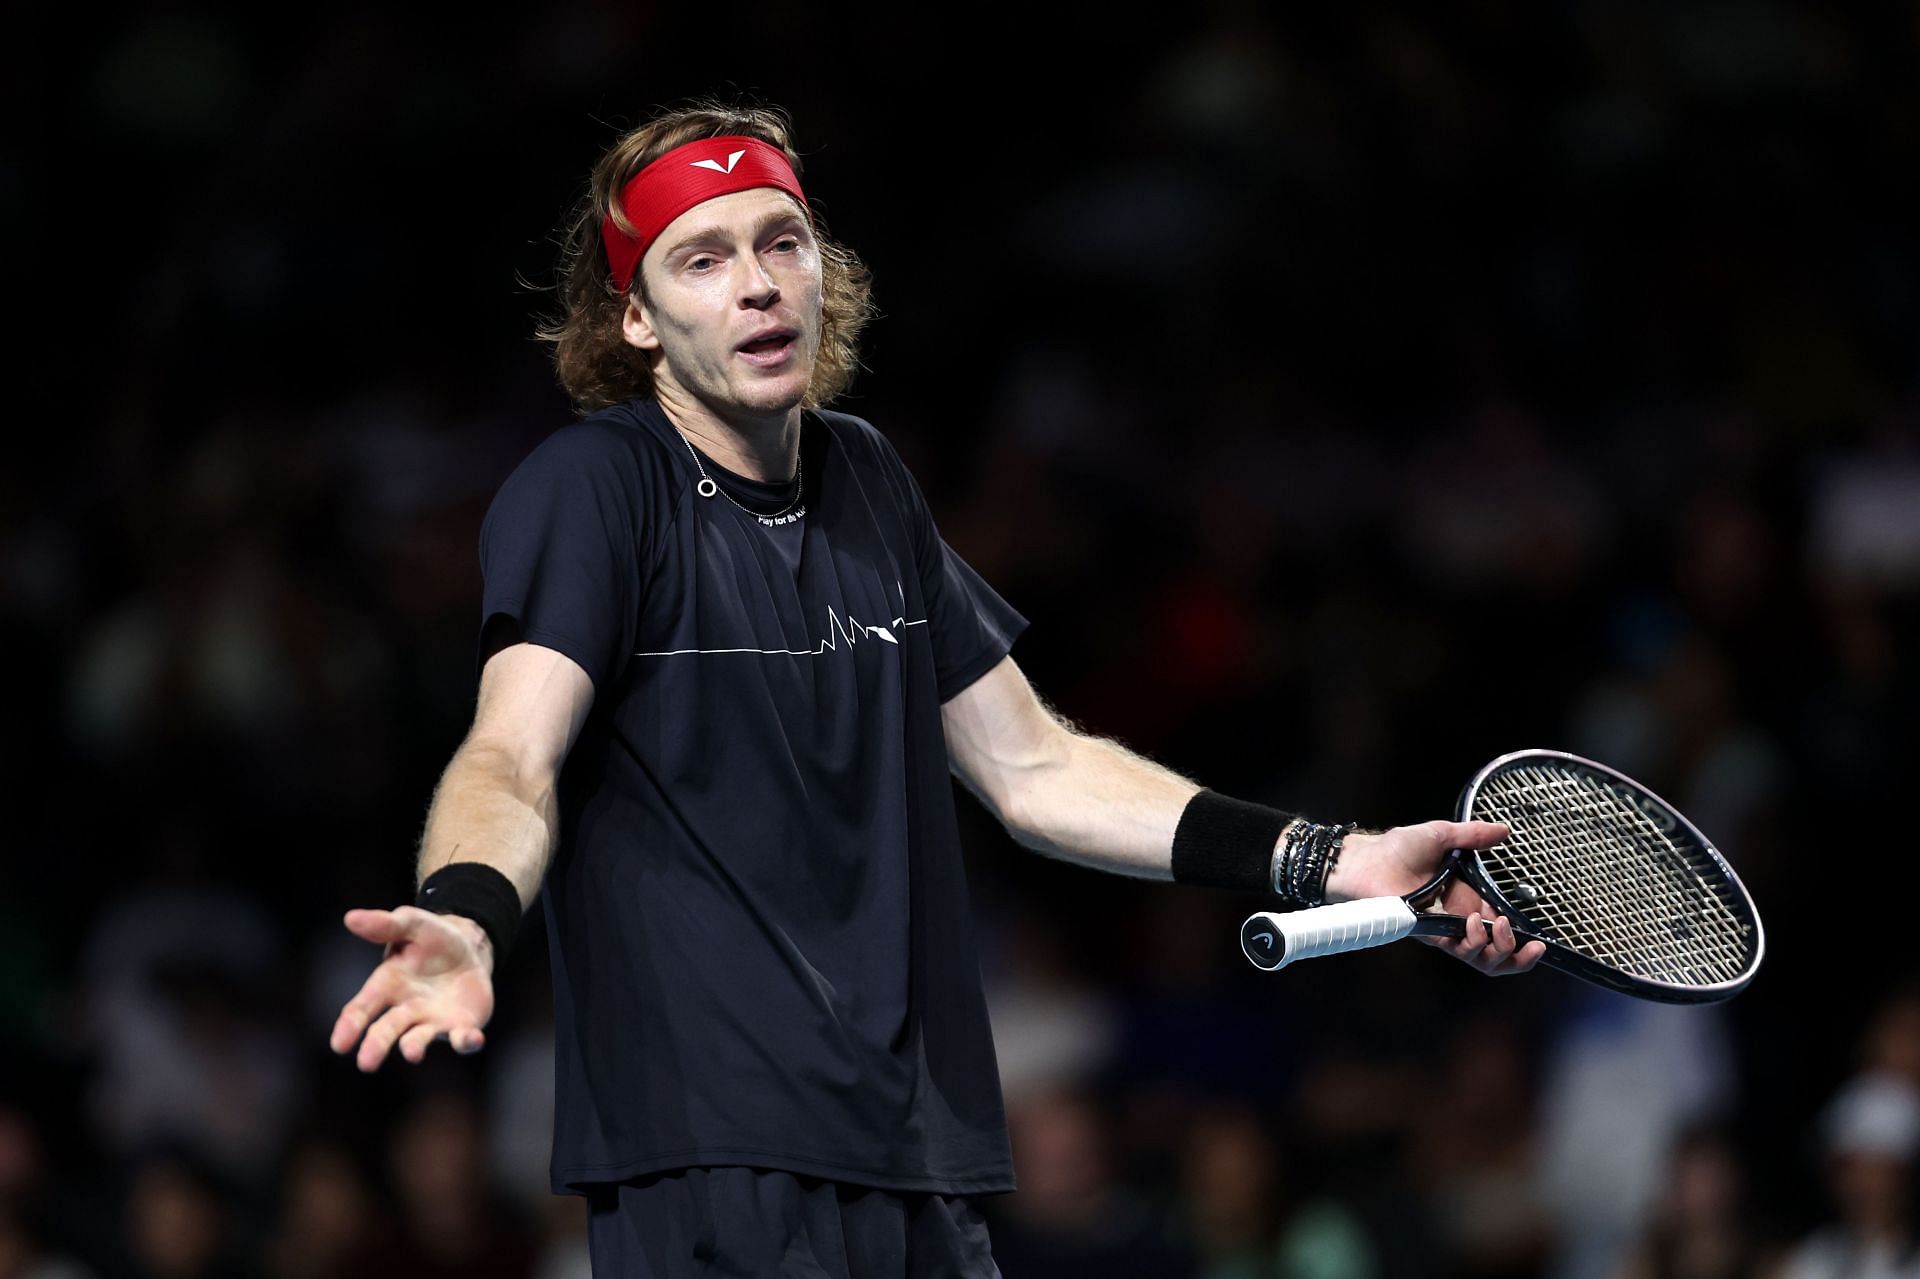 Andrey Rublev at the Ultimate Tennis Showdown in London